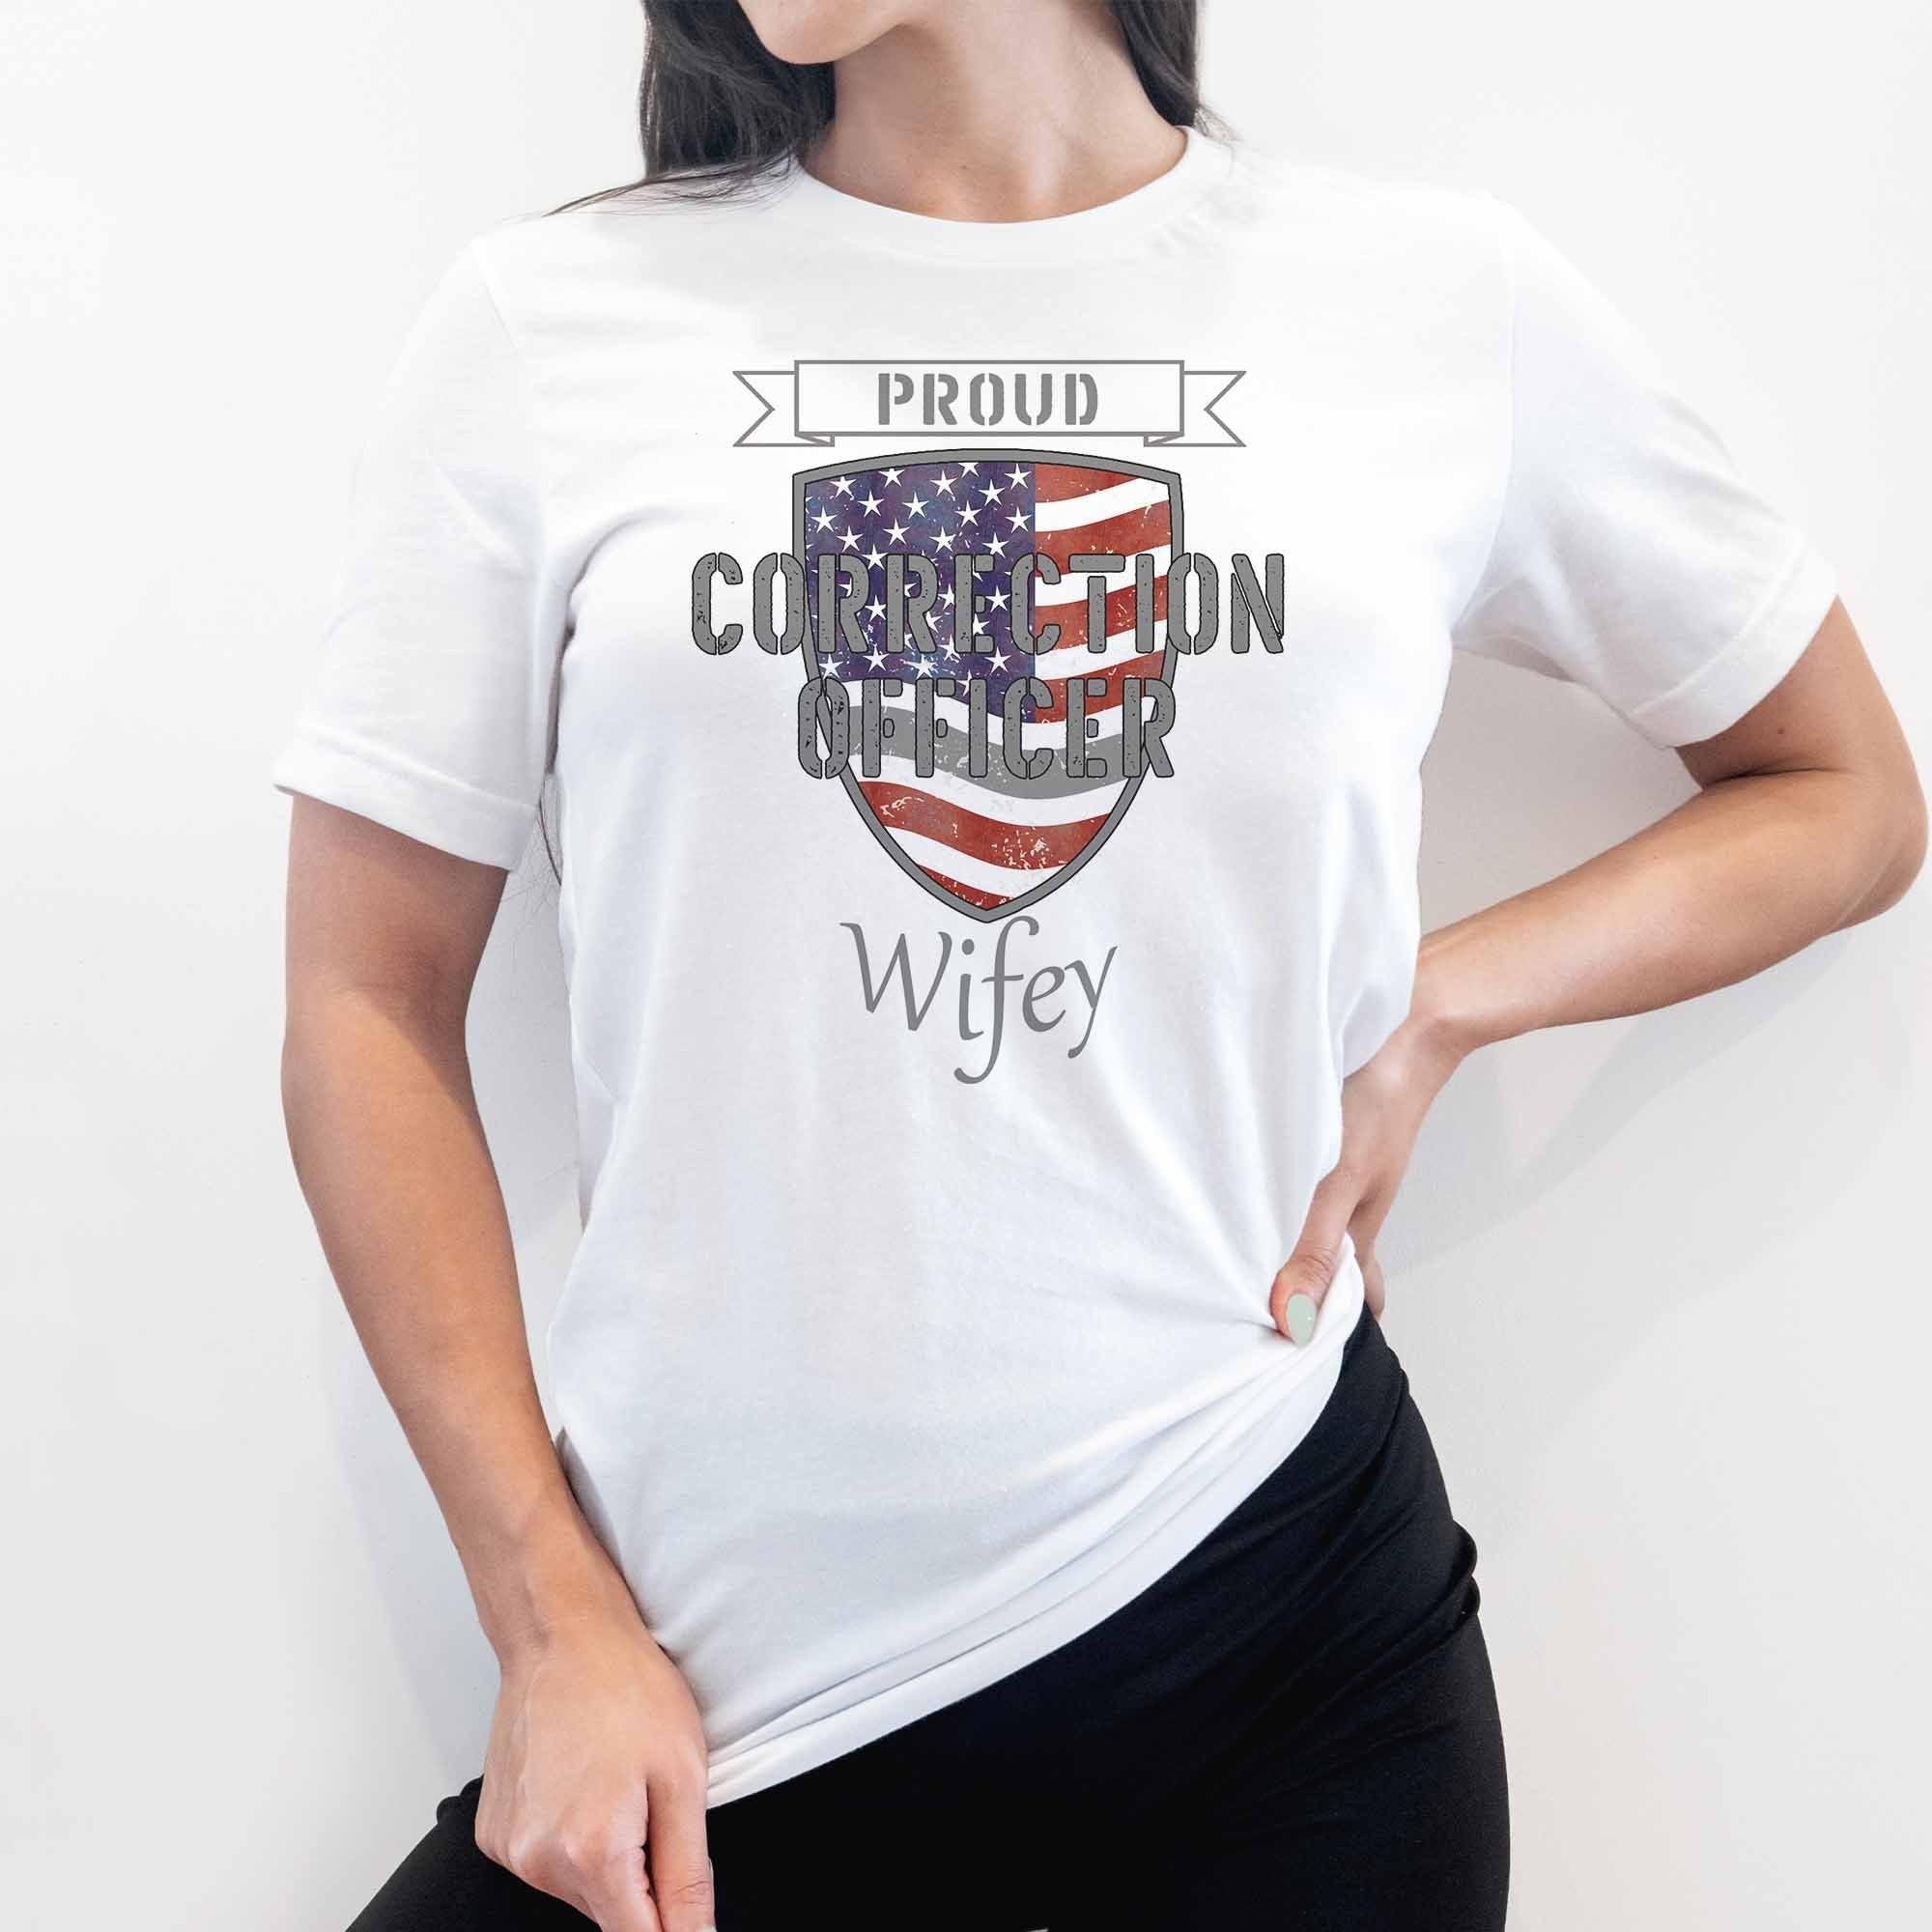 Proud Correction Officer Wifey - My Custom Tee Party